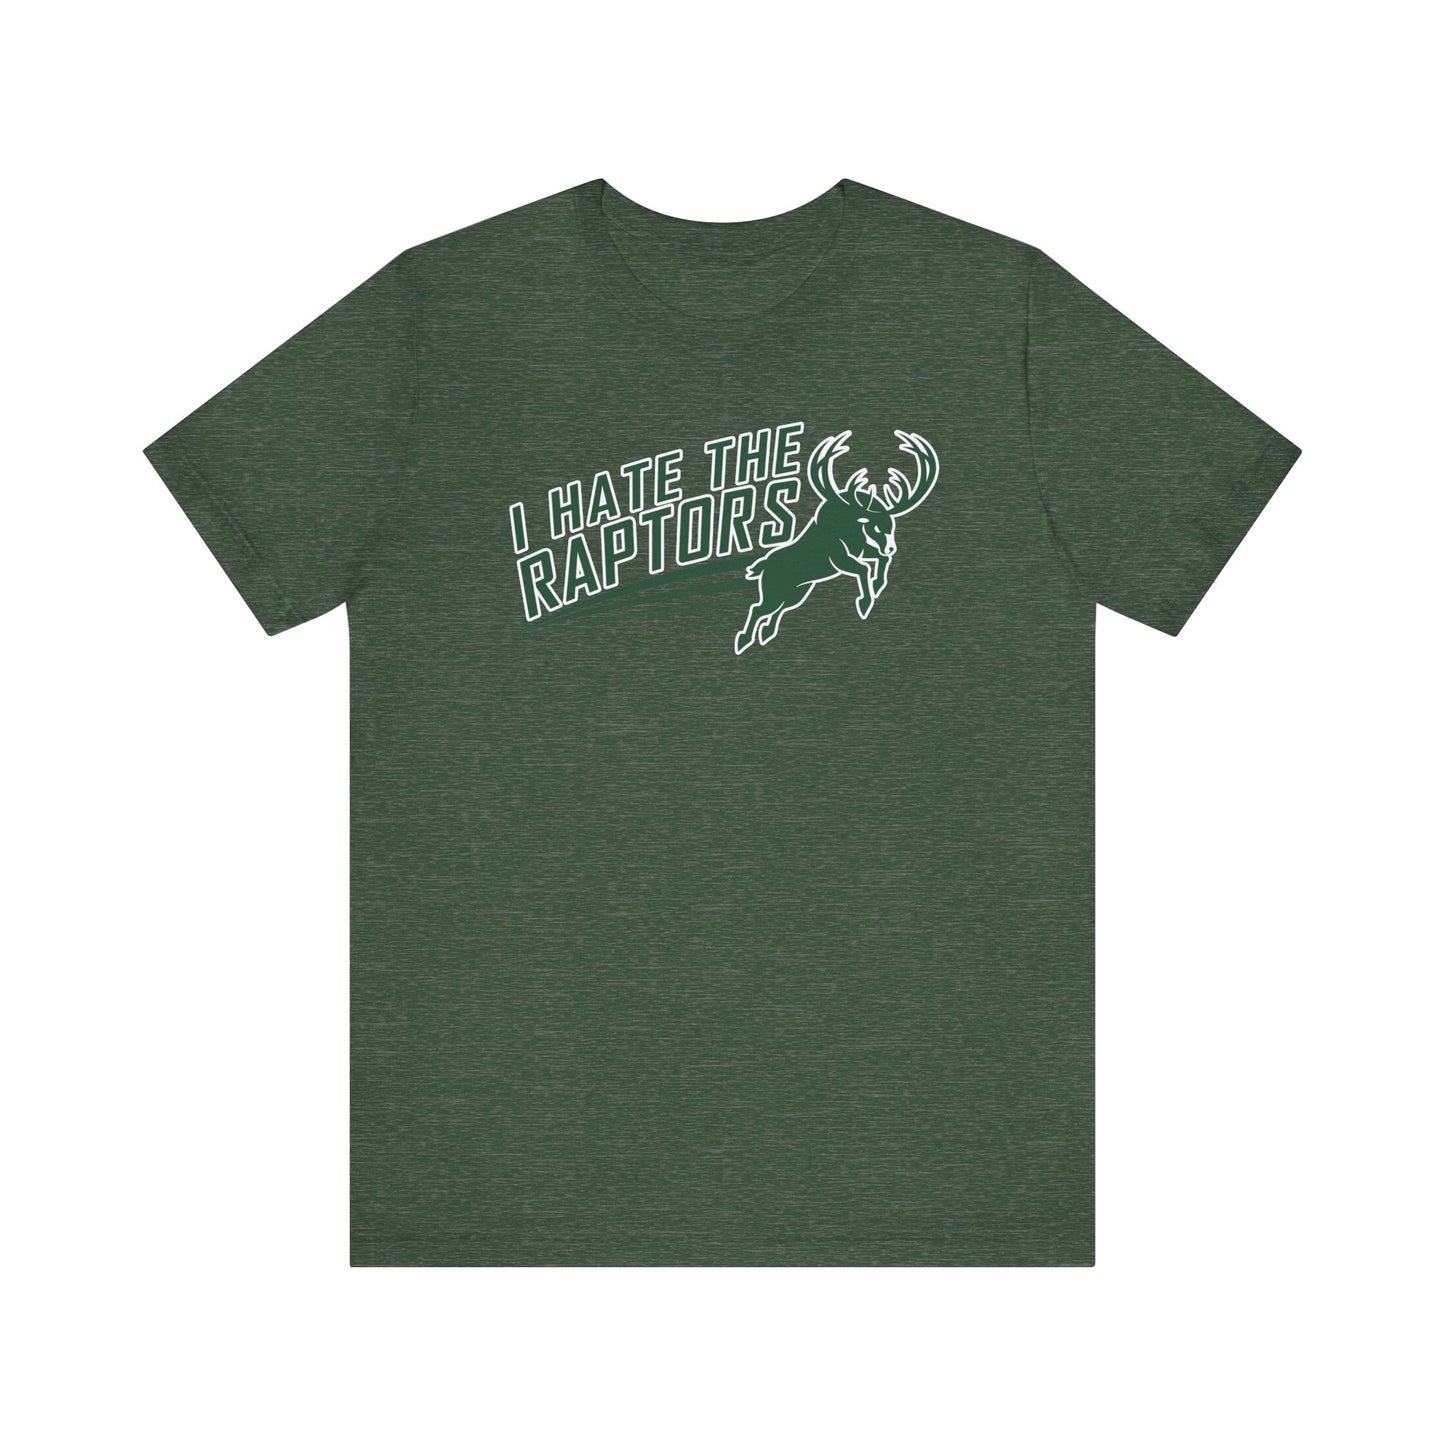 I Hate The Rappters (for Milwaukee fans) - Unisex Jersey Short Sleeve Tee